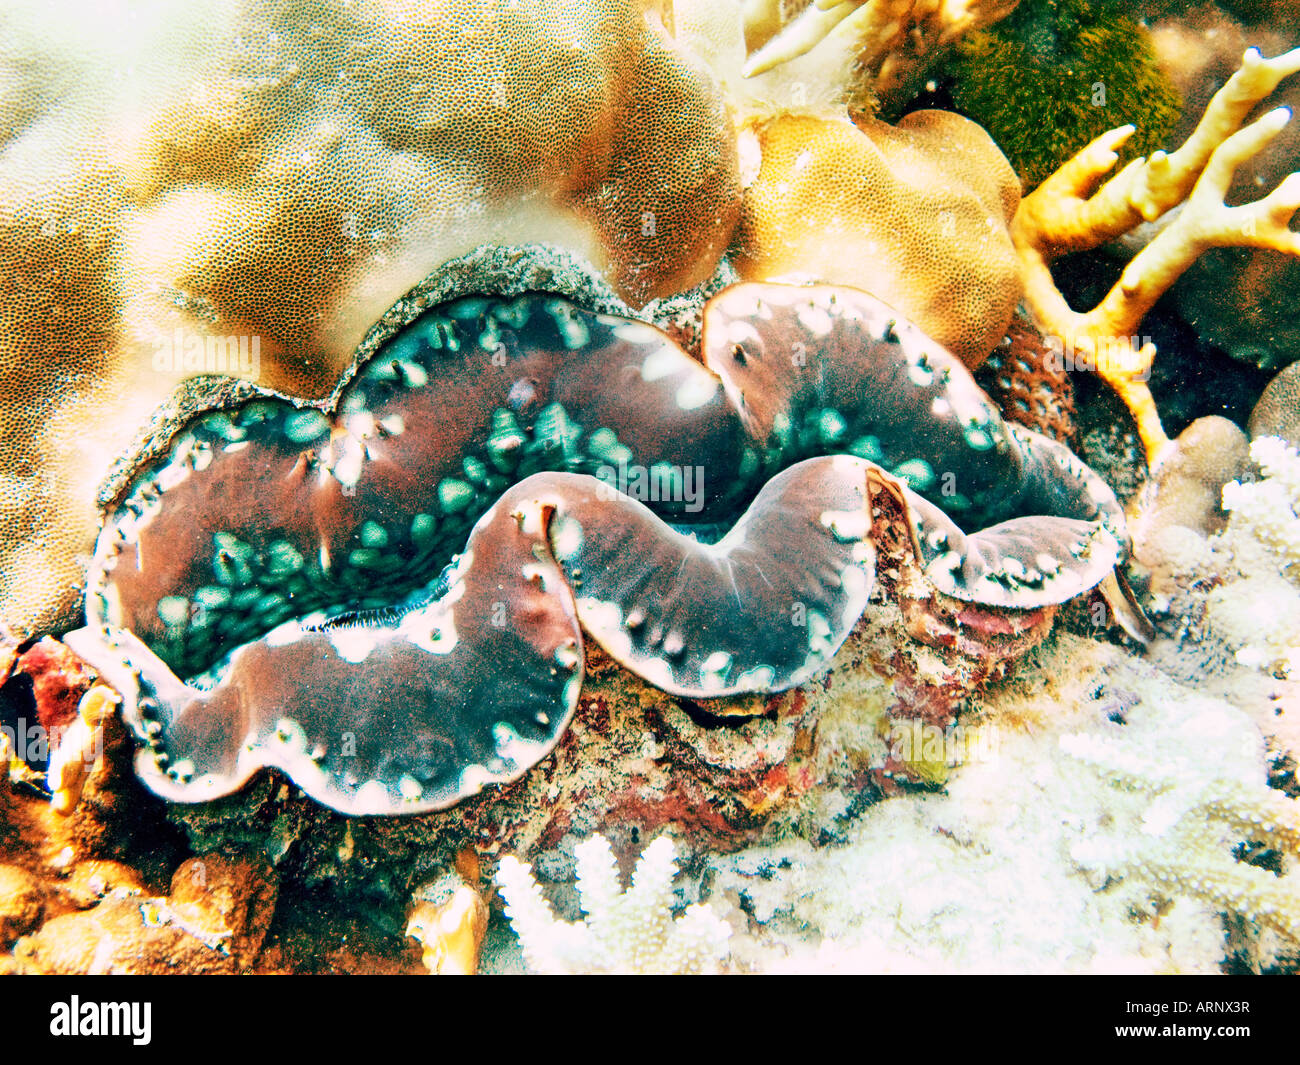 Life giant clam in coral reef January 2008, Similan islands, Andaman sea, Thailand Stock Photo